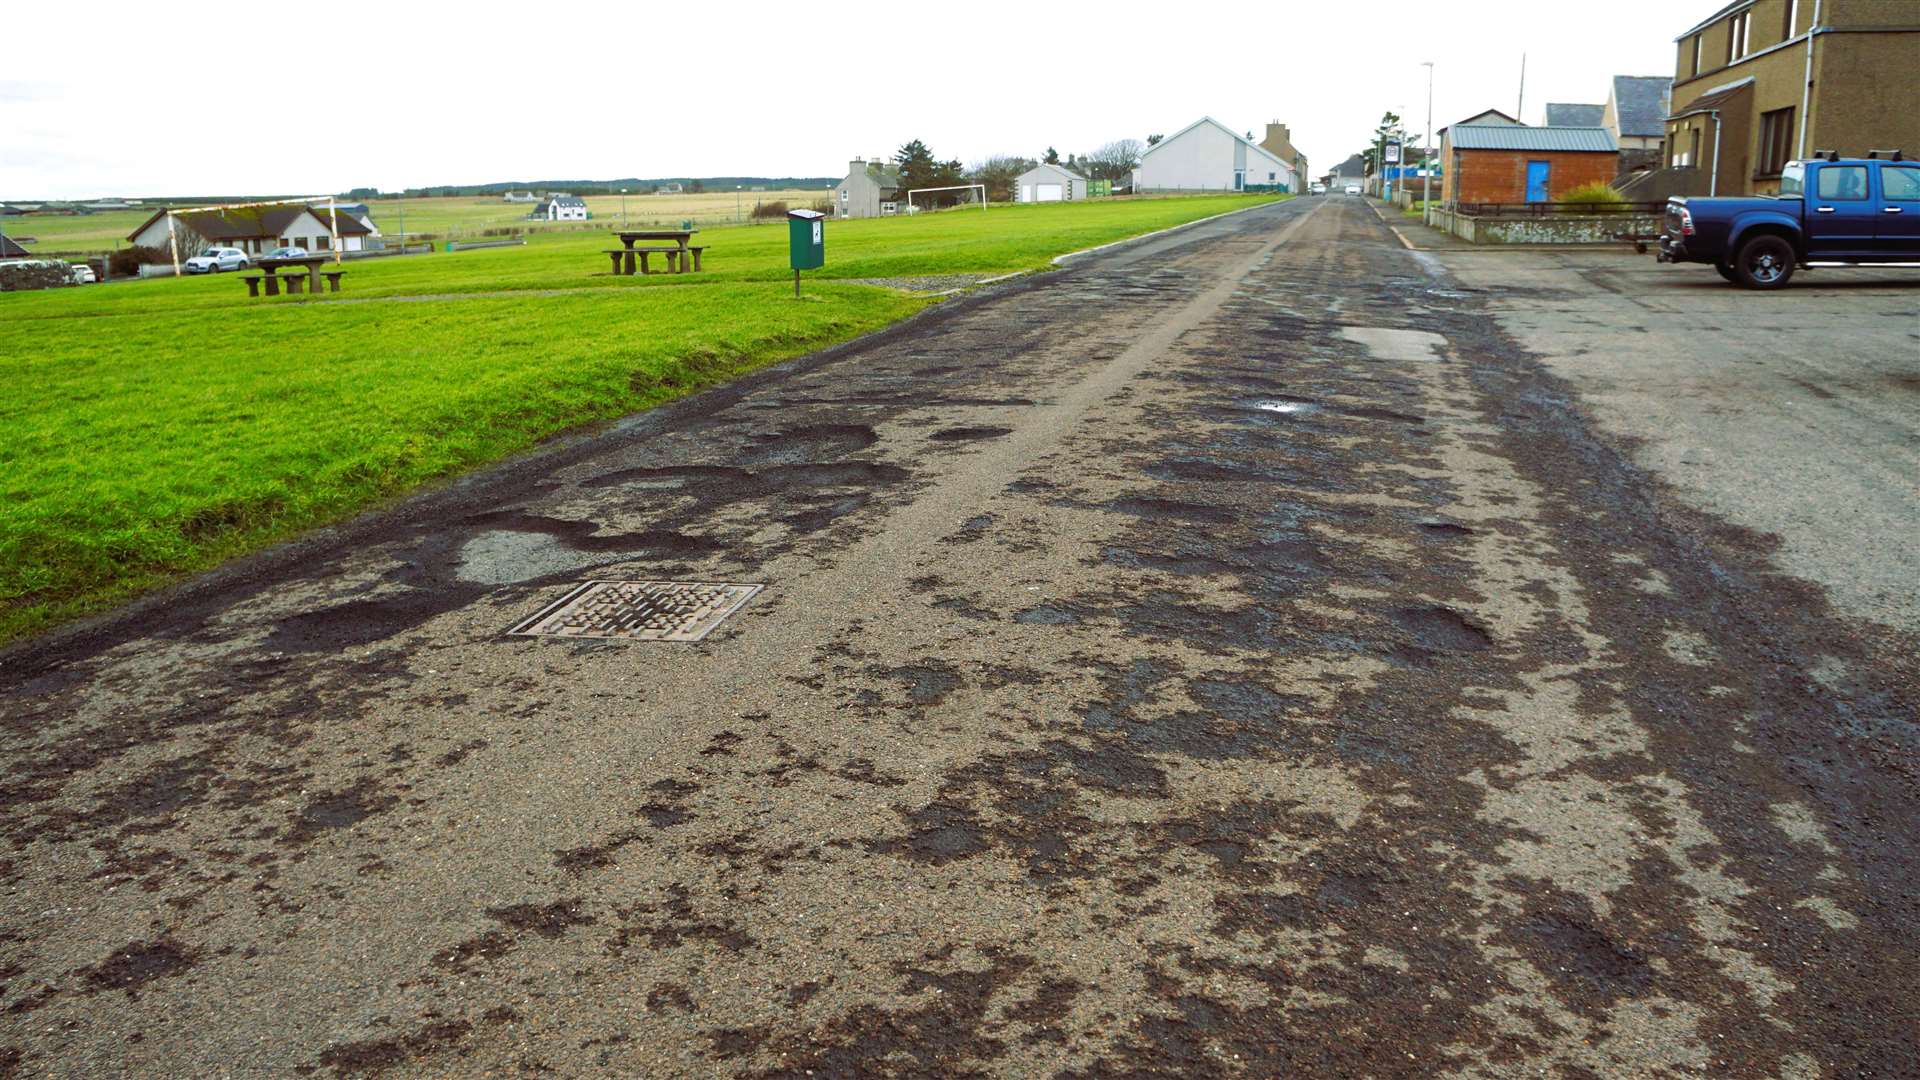 High Street in Keiss is riddled with potholes along its length which are impossible to avoid when driving. Picture: DGS